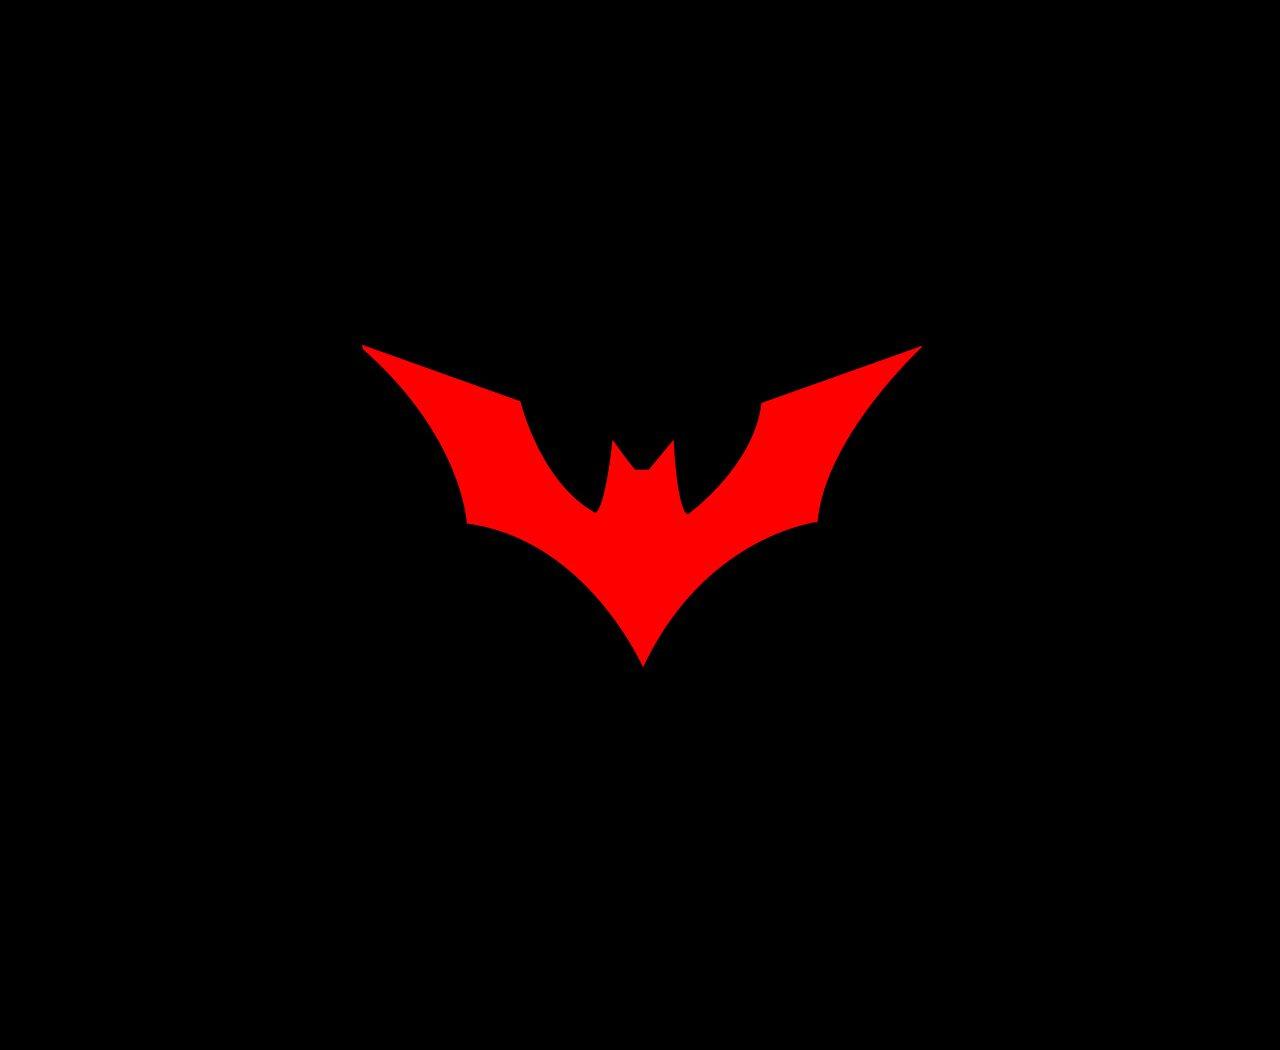 Cool Black and Red Logo - Cool Minimalist Batman Logo Wallpaper In Black And Red | PaperPull